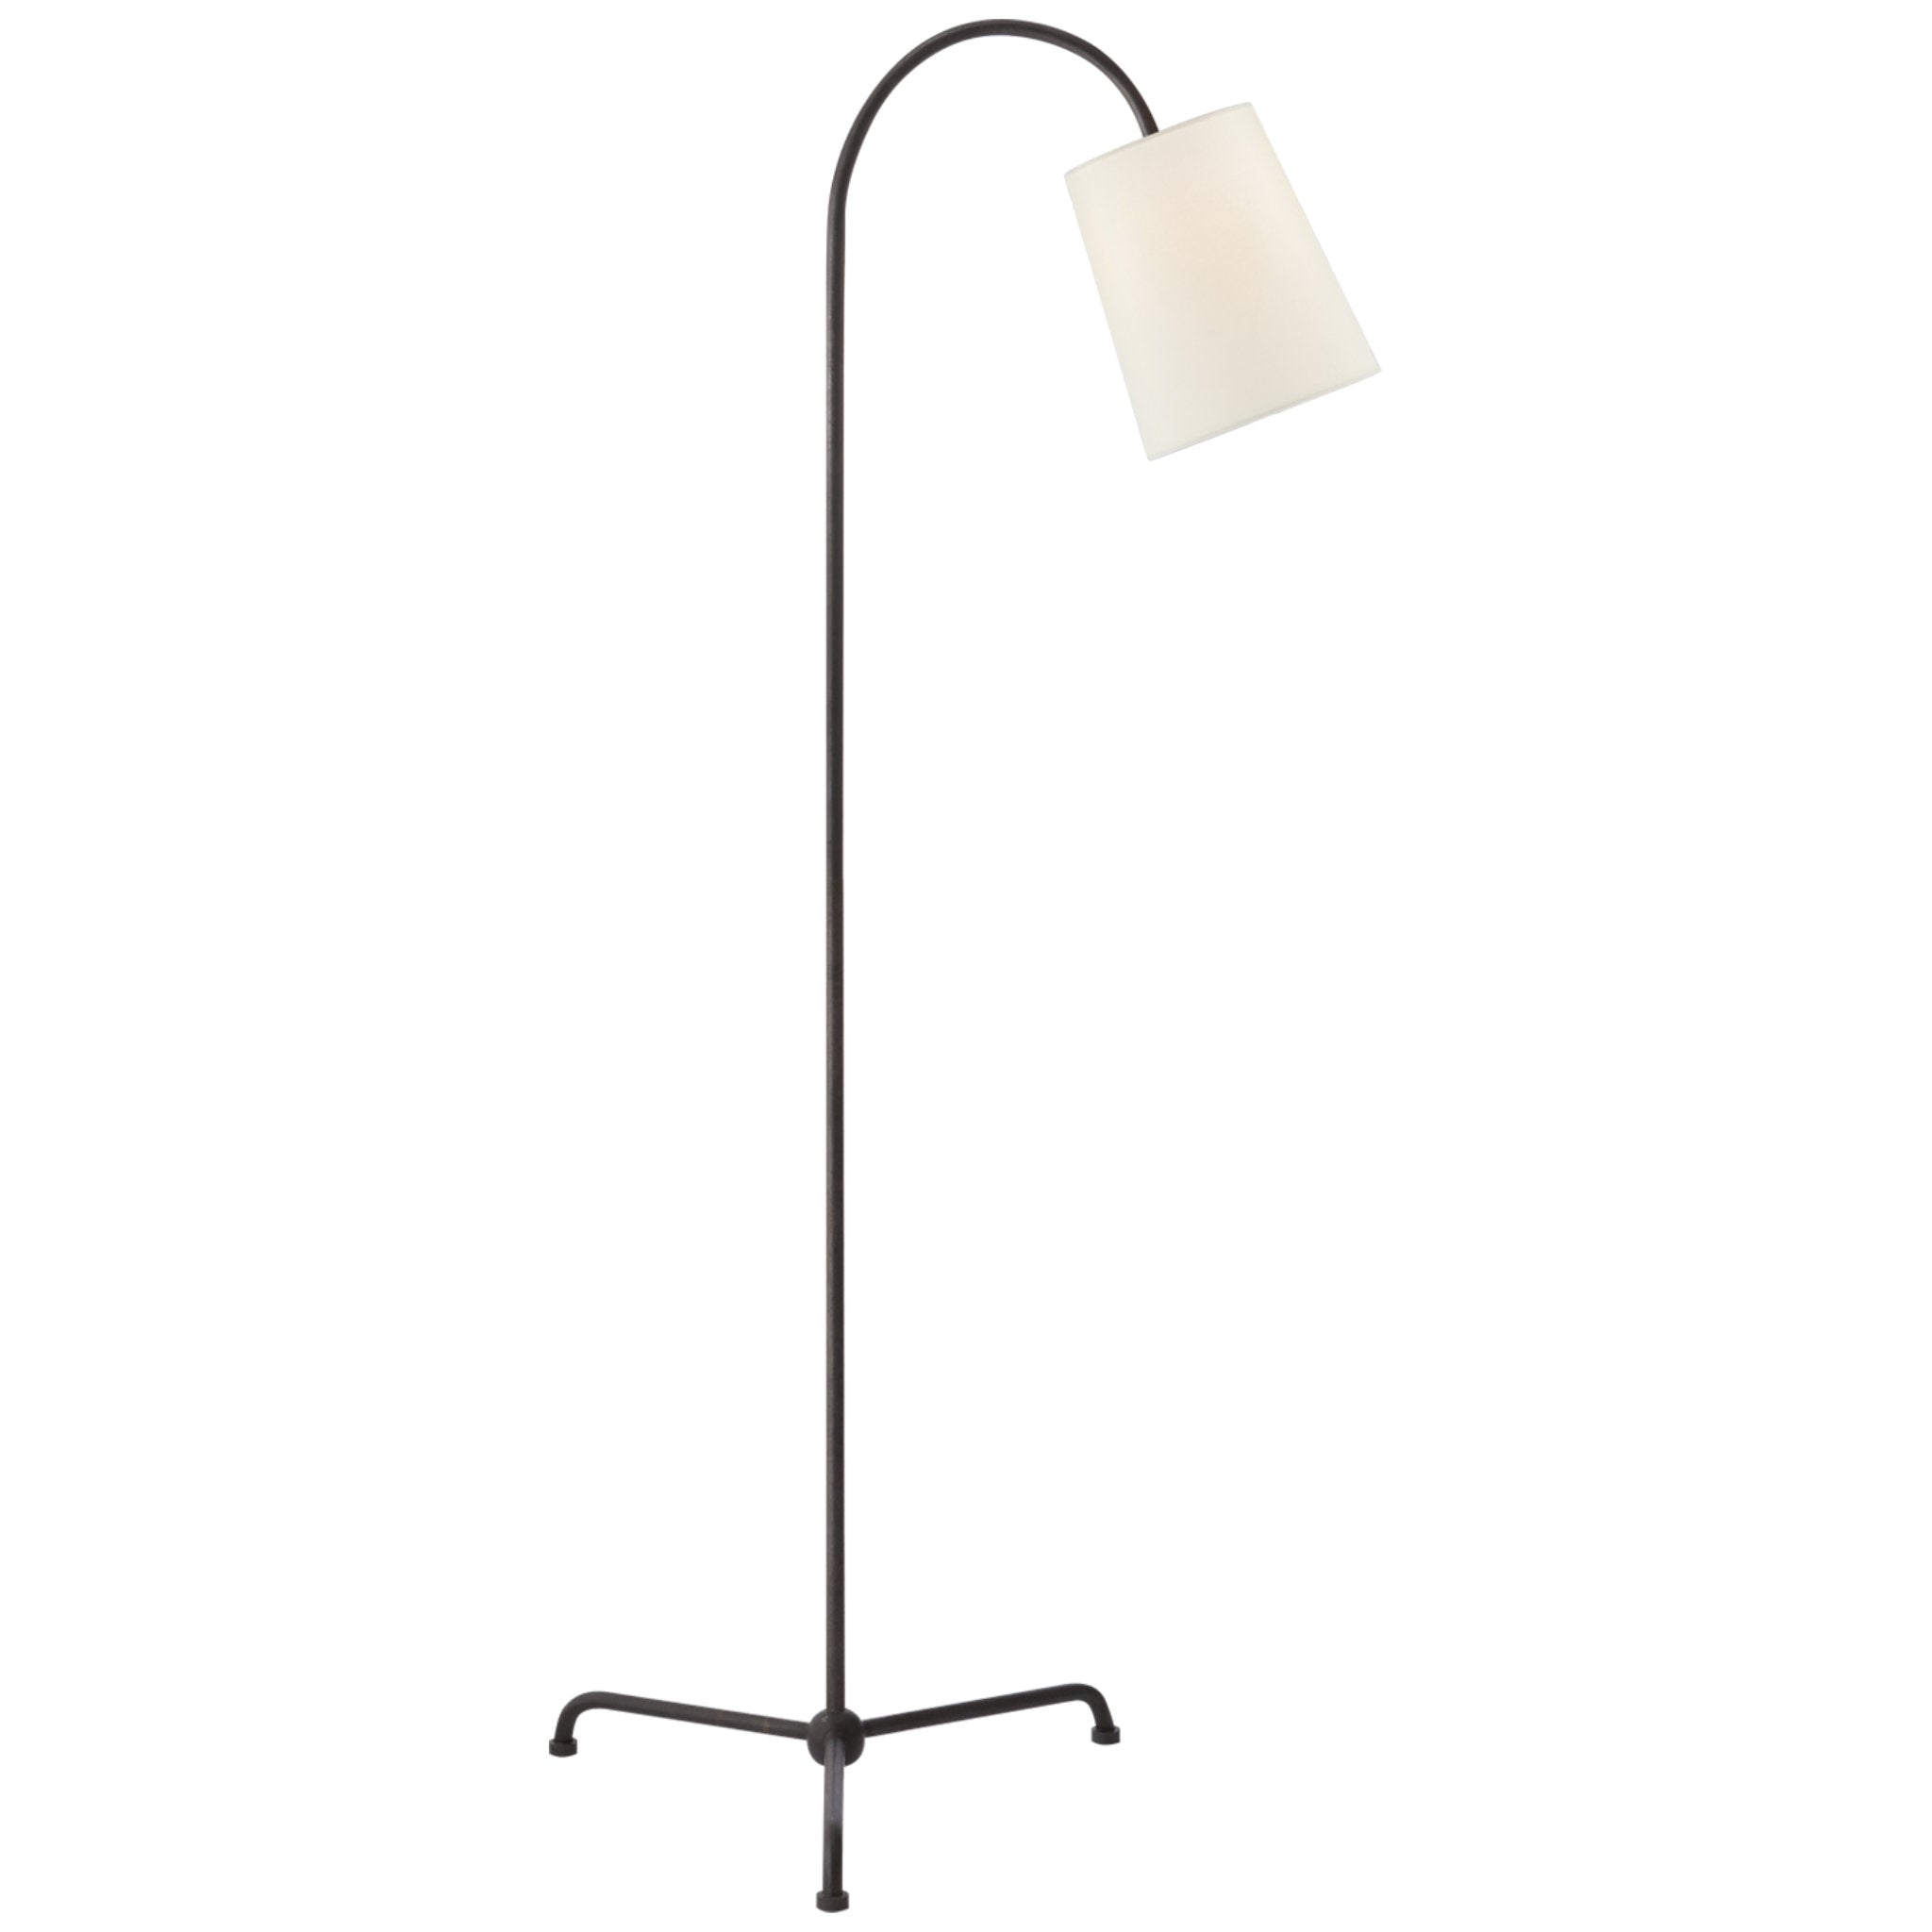 Thomas O'Brien Mia Floor Lamp in Aged Iron with Linen Shade